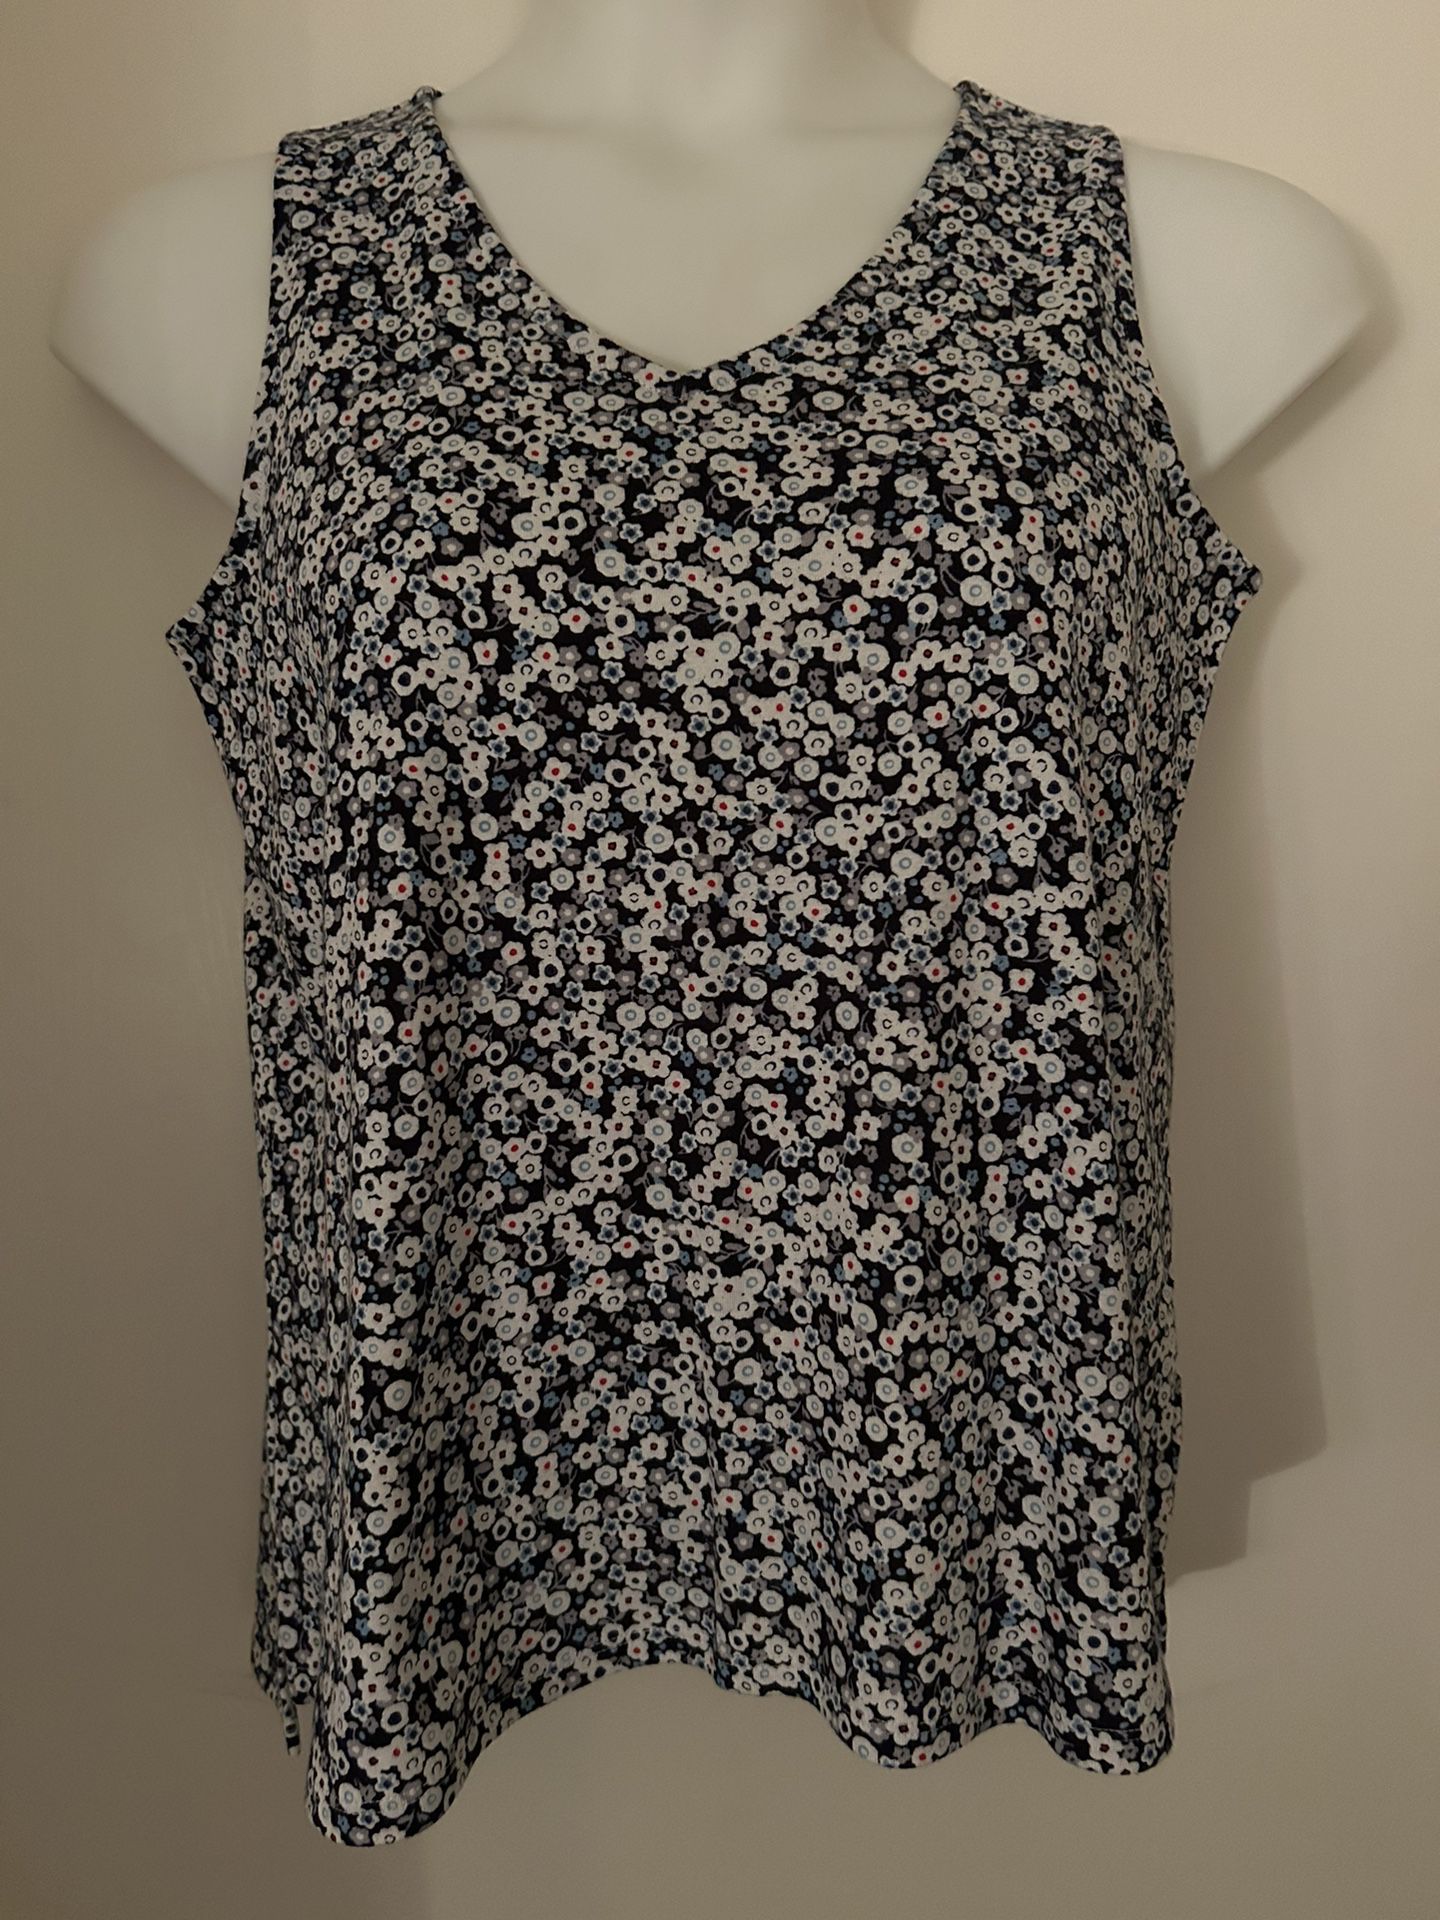 11 - J. JILL NEW OR LIKE NEW  WOMEN’S CLOTHING ITEMS SIZE M & L